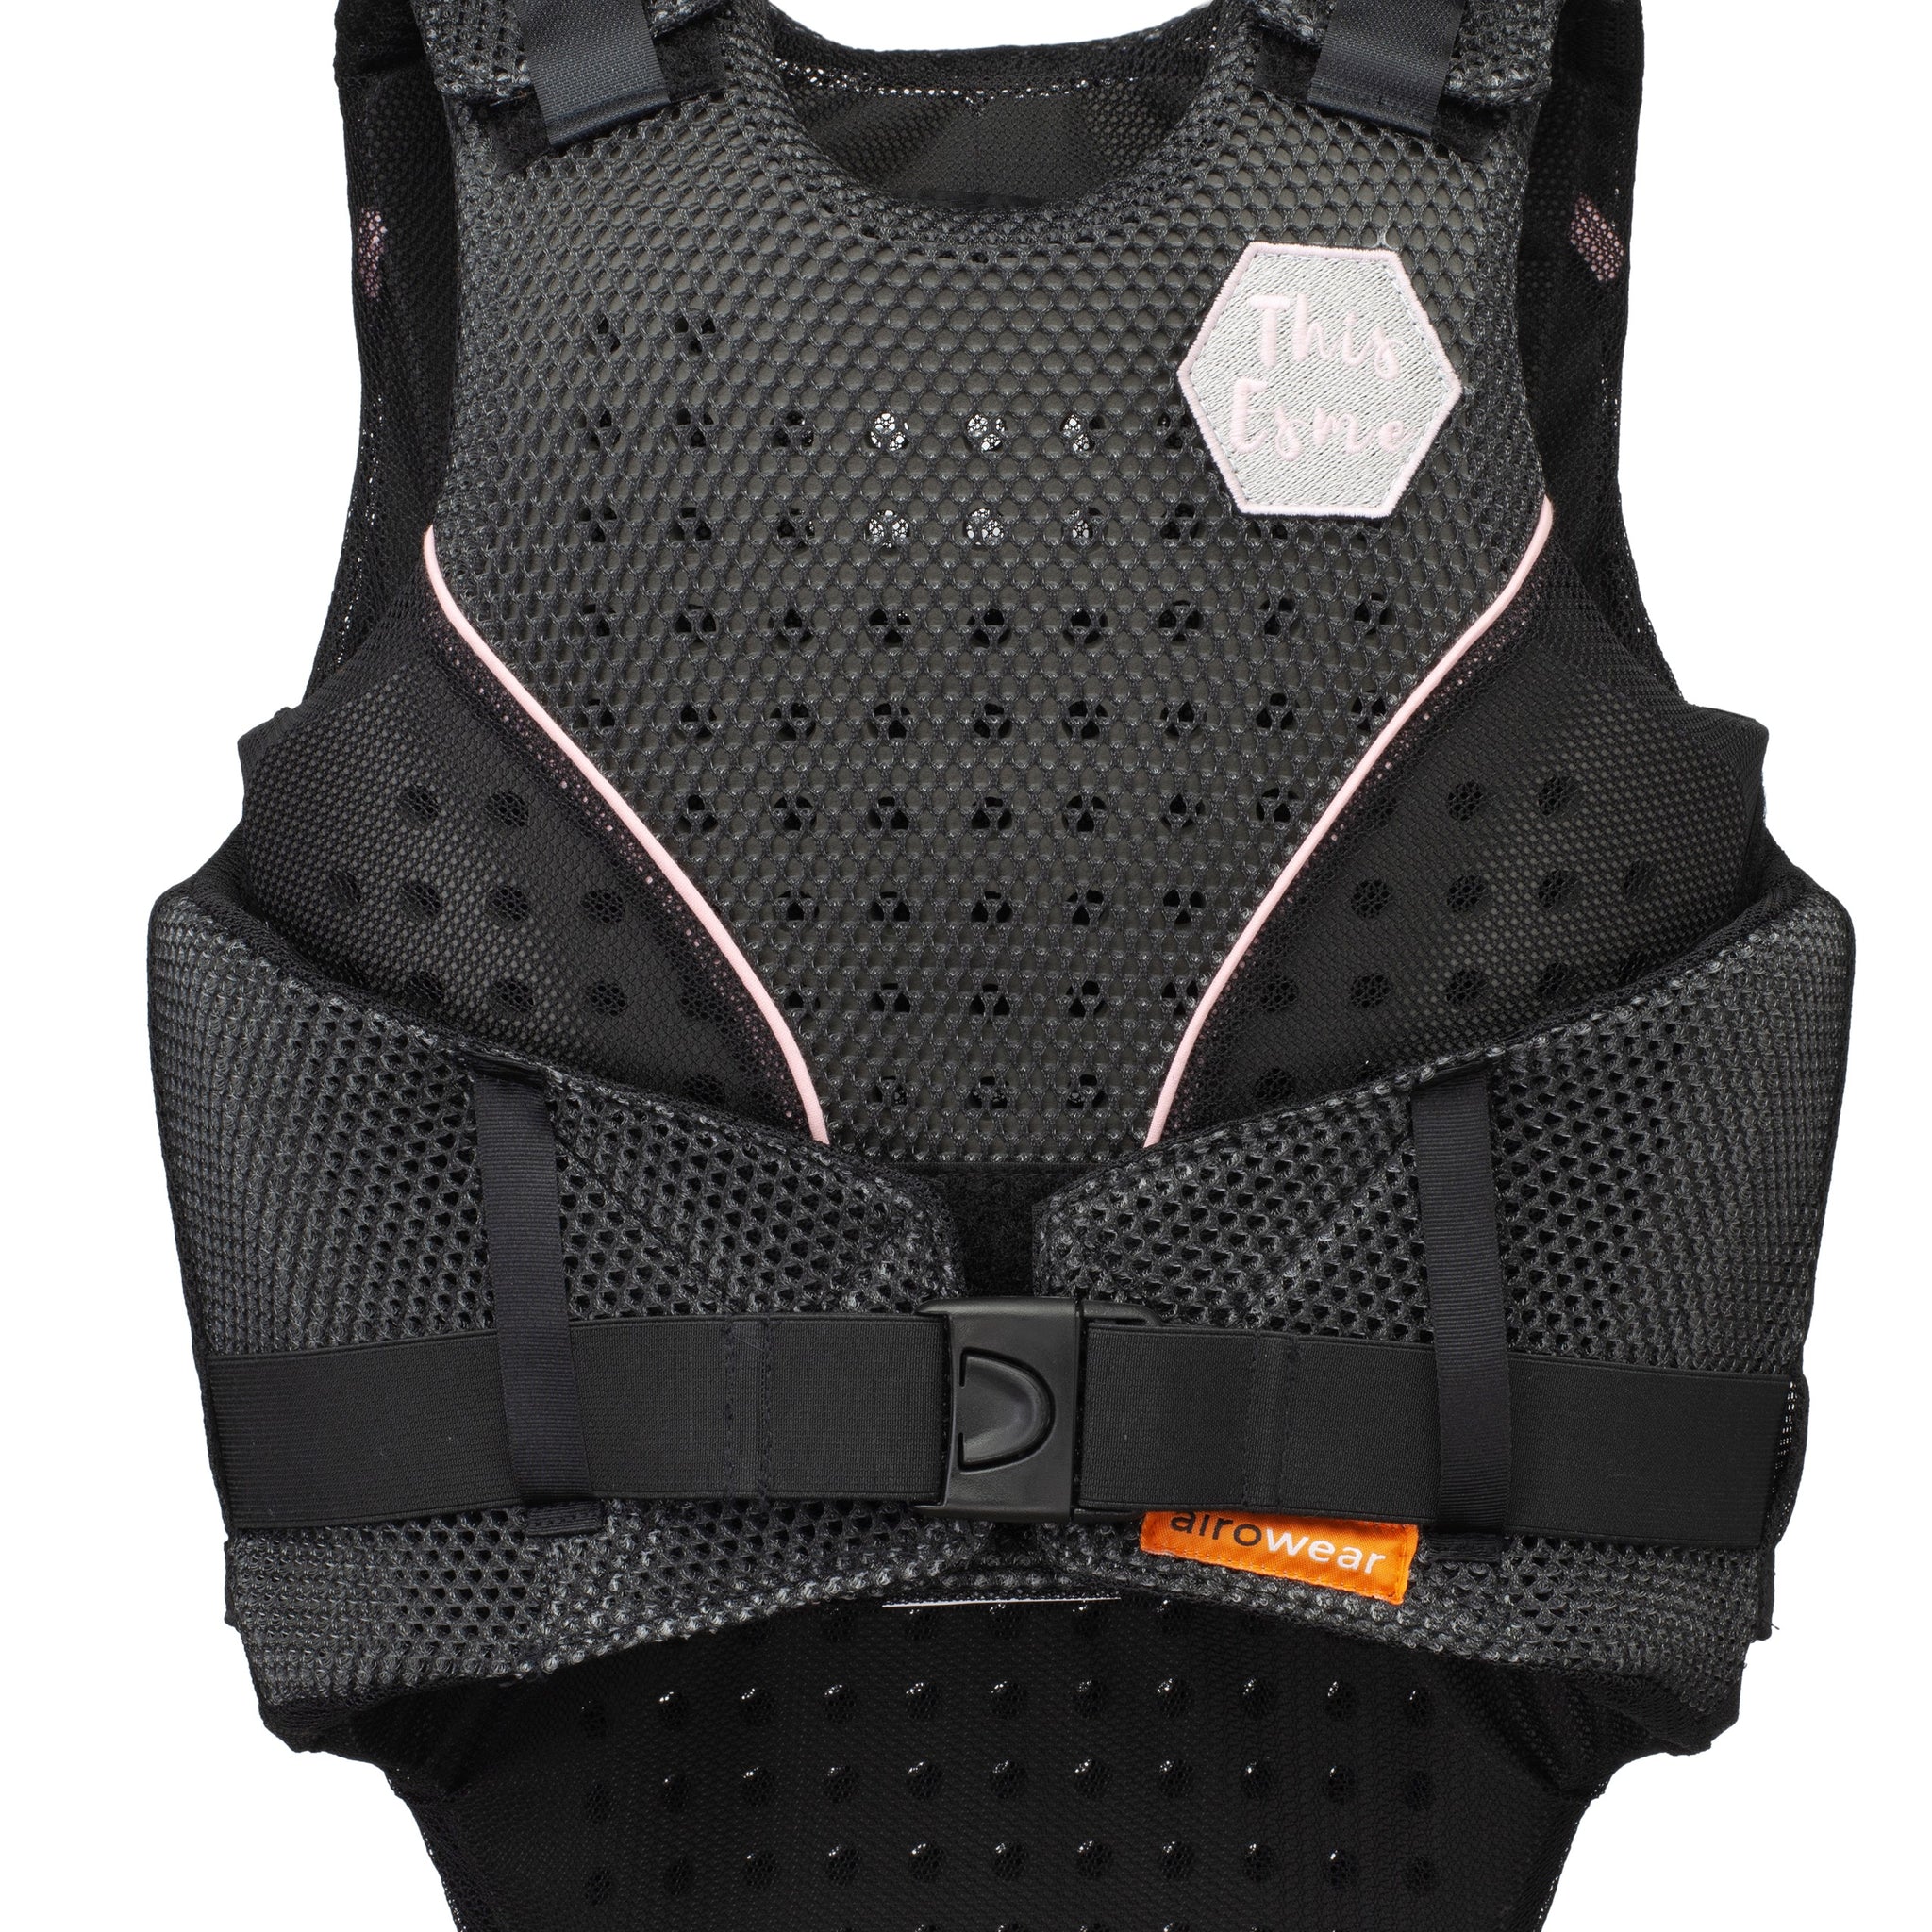 Airowear This Esme Adults Body Protector - Baby Pink